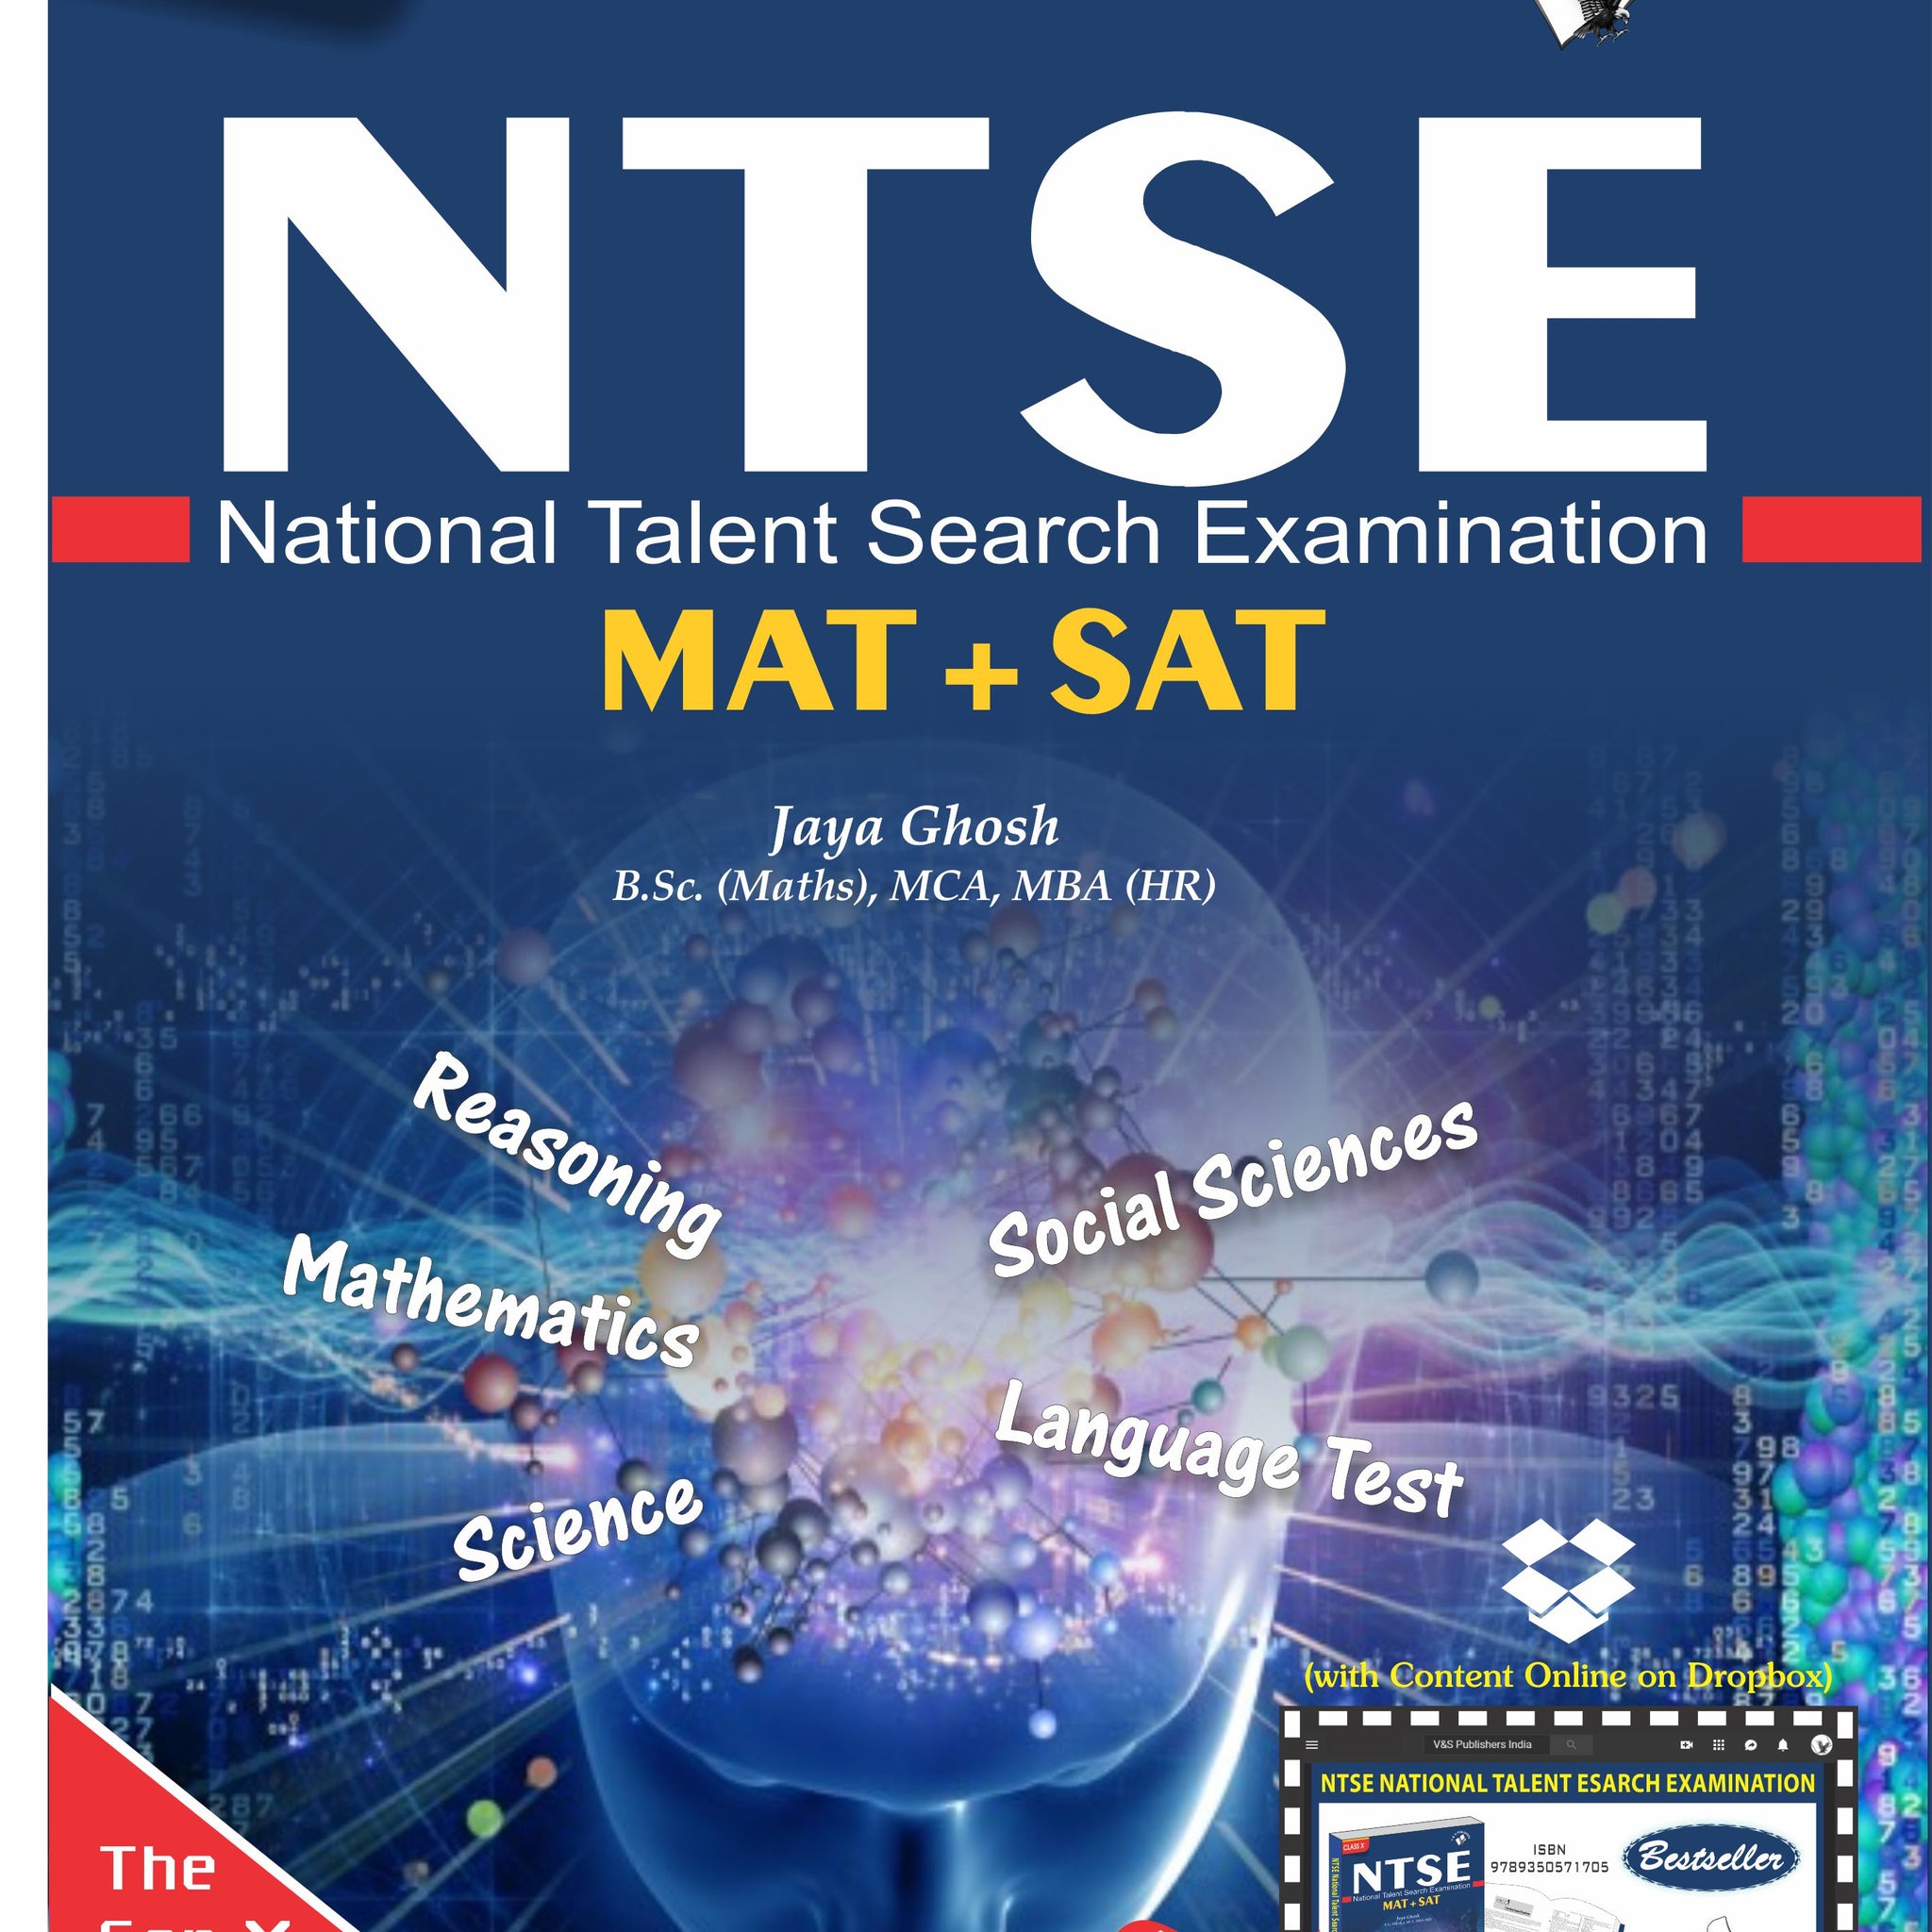 NTSE  National Talent Search Examination (With Online Content on Dropbox)